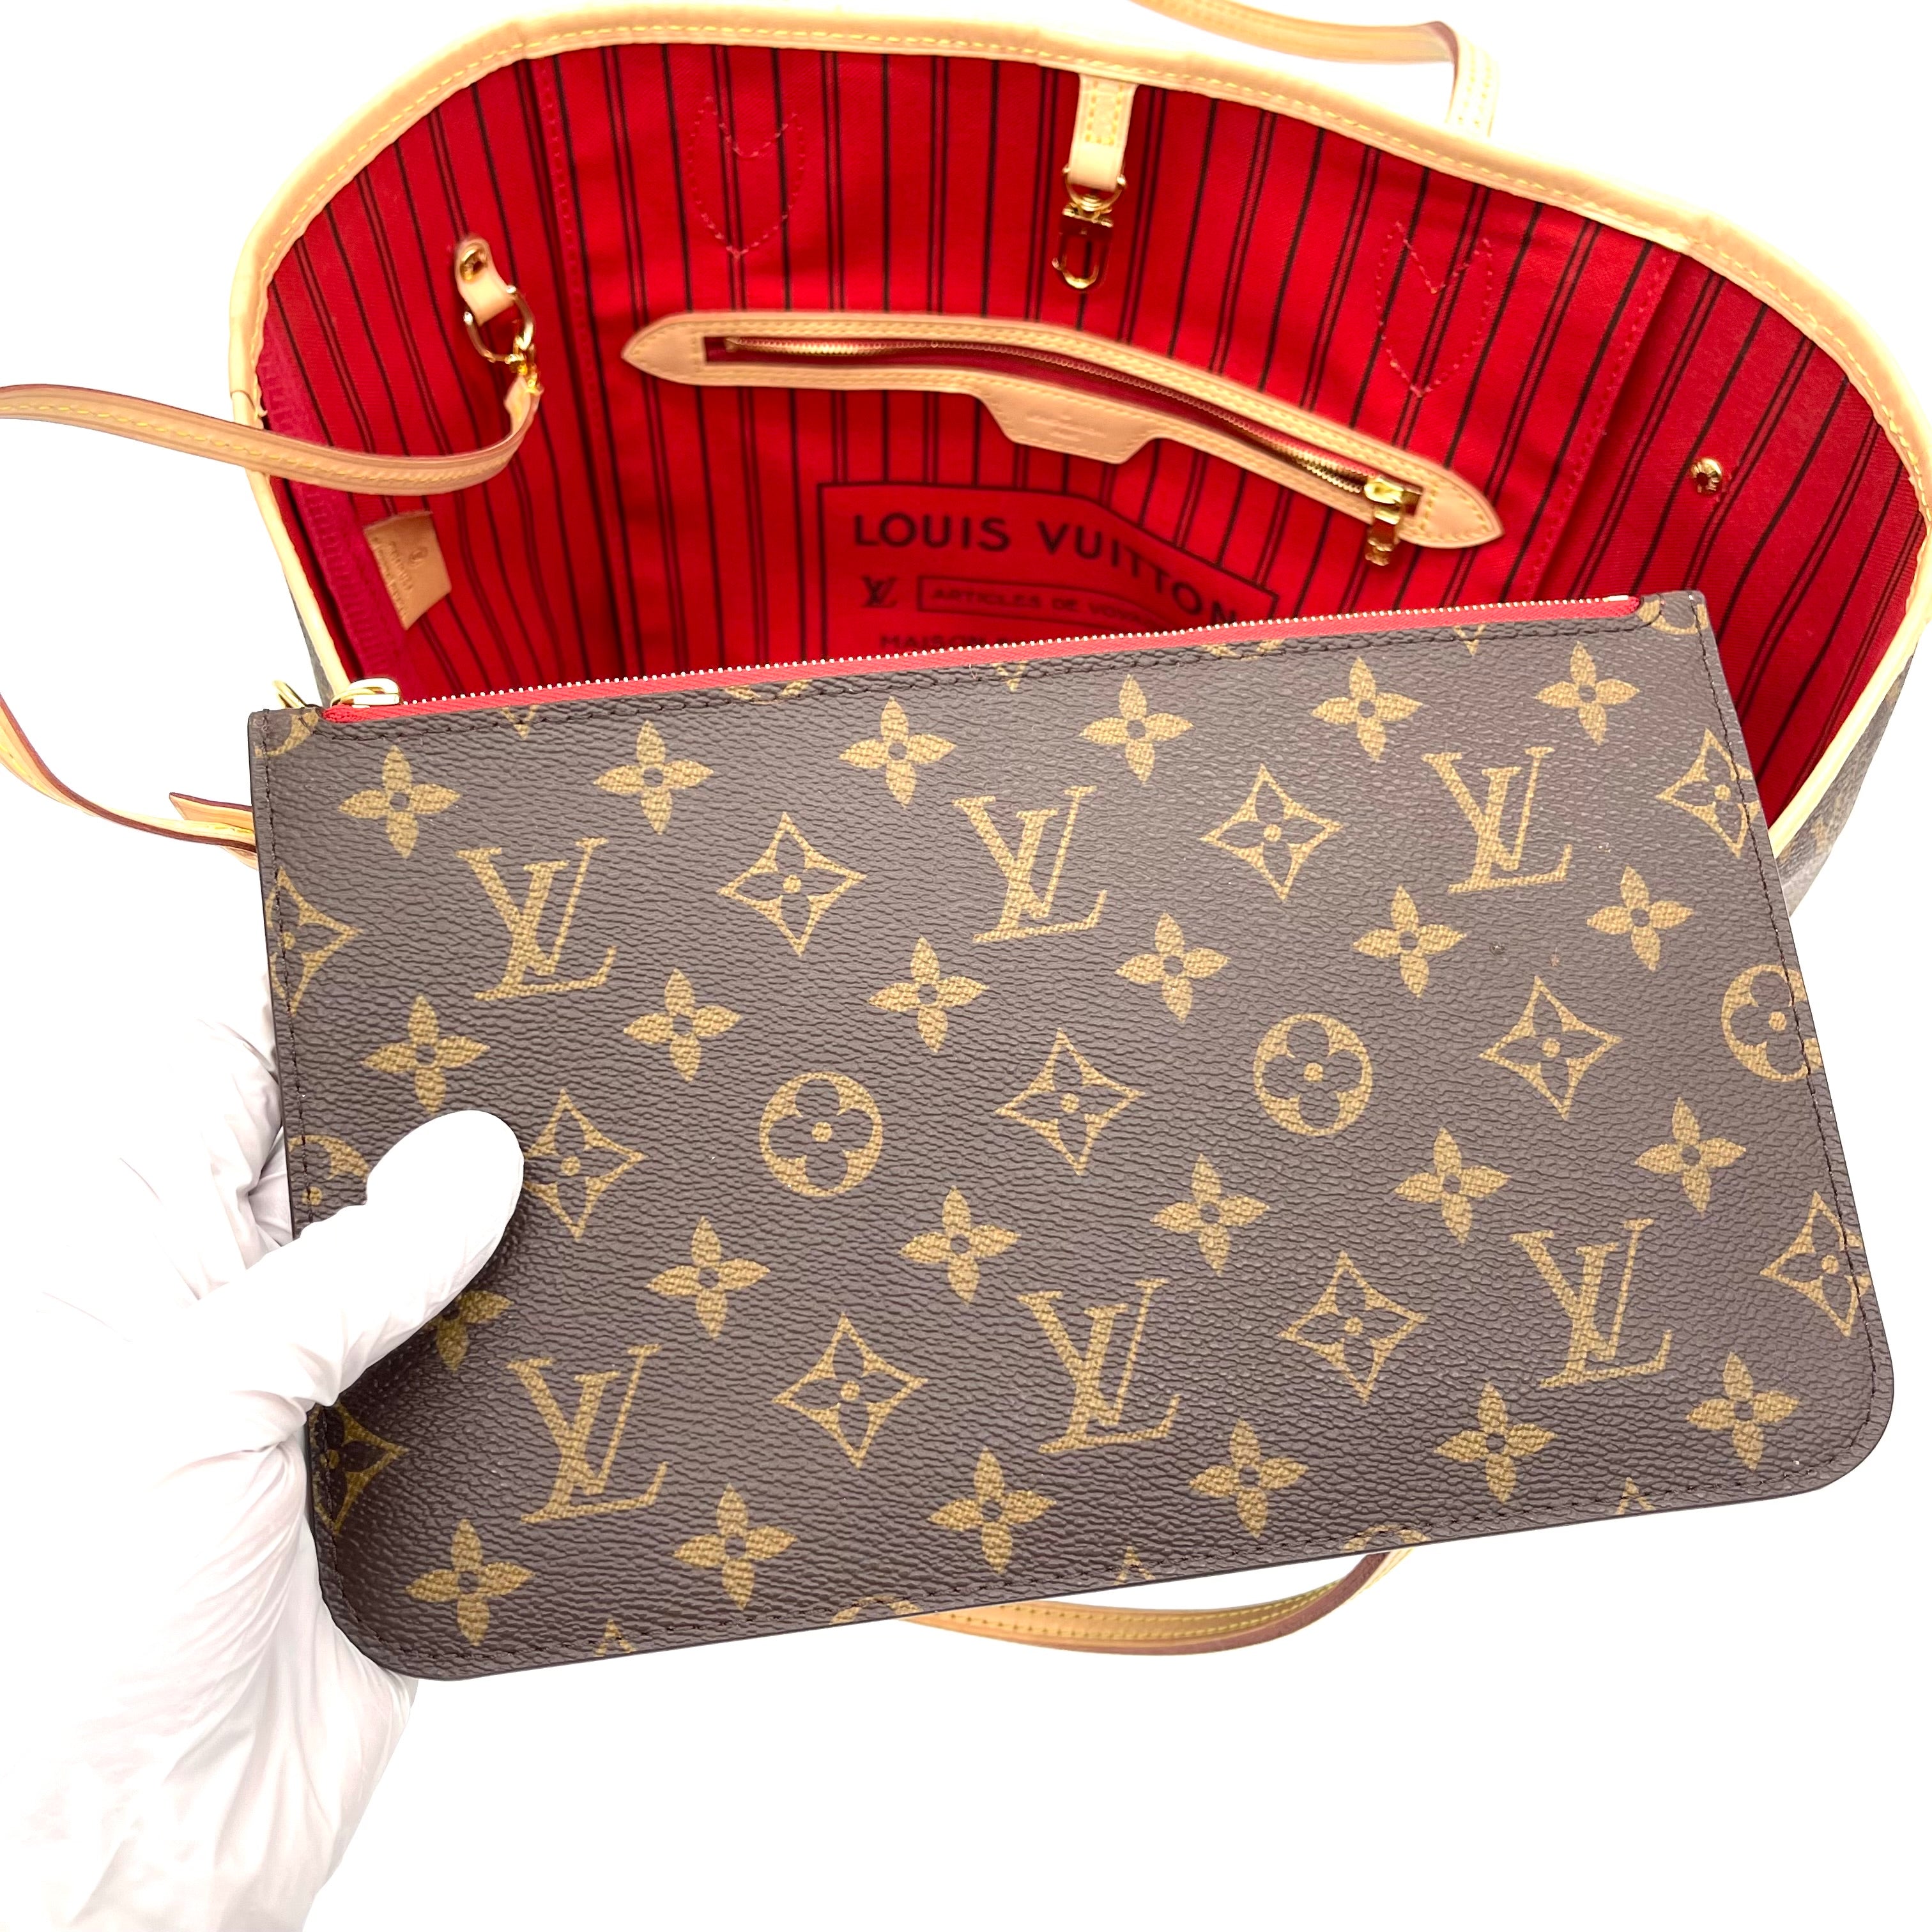 Shop Louis Vuitton Neverfull mm (M41177) by 夢delivery